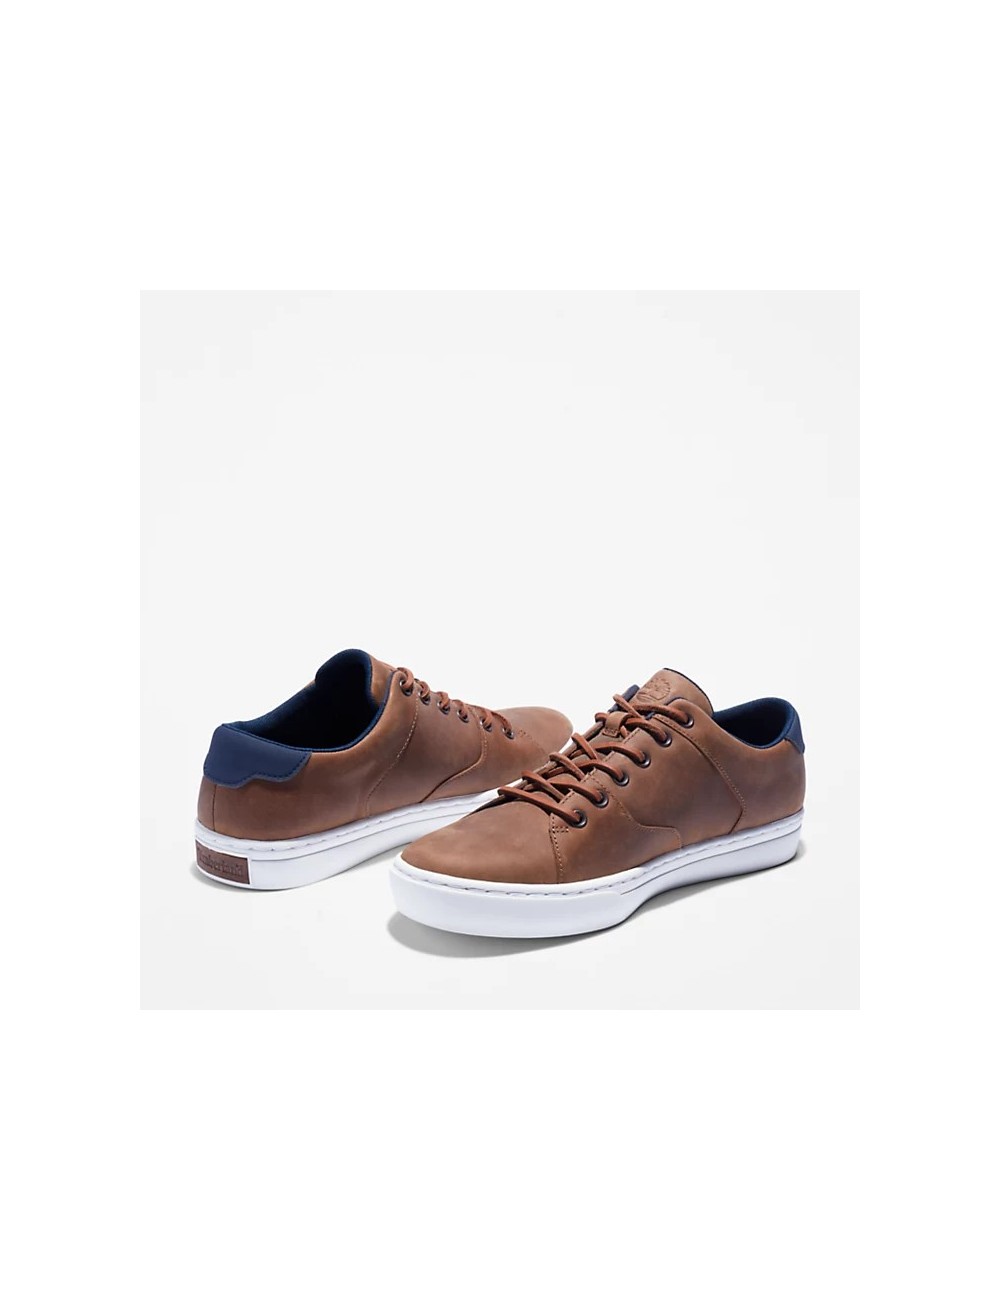 SNEAKERS HOMBRE TIMERLAND ADV 2.0 LEATHER